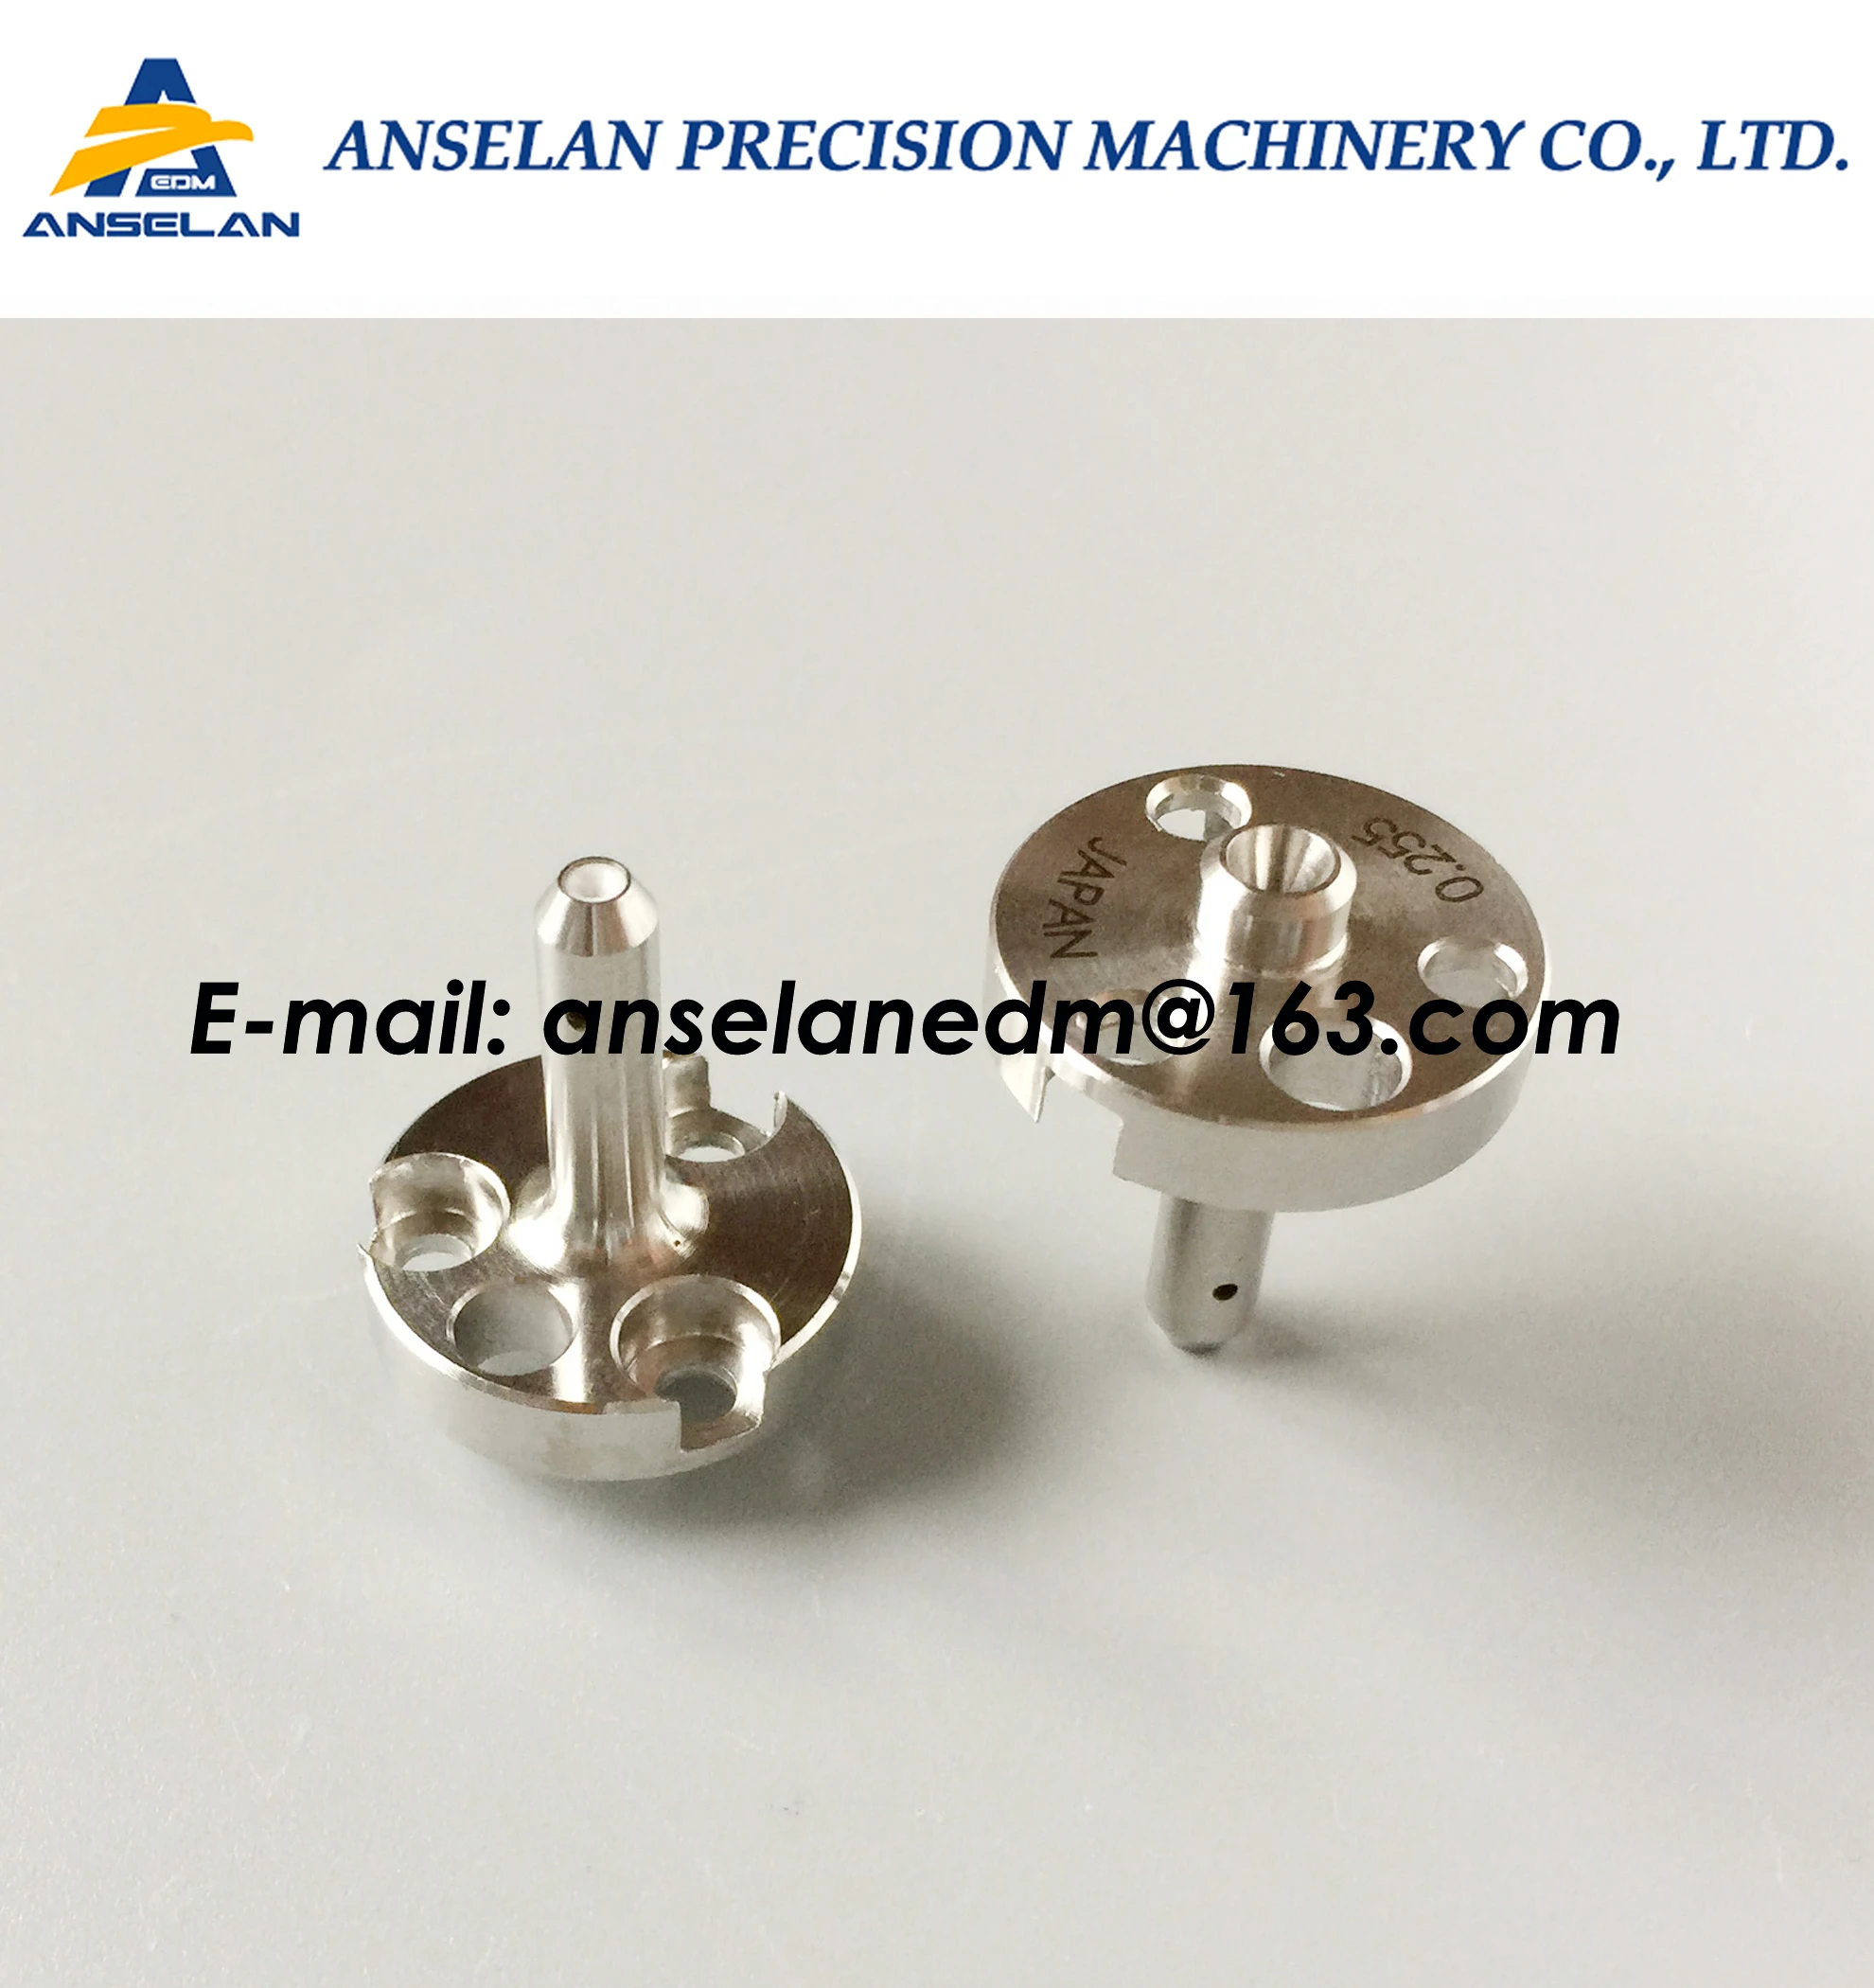 

Ø0.305mm A290-8021-Y777 edm Wire Guide F102T For big taper Lower for Fanuc O,P,Q,R,S,T Diamond guide lower 0.305 A290.8021.Y777,